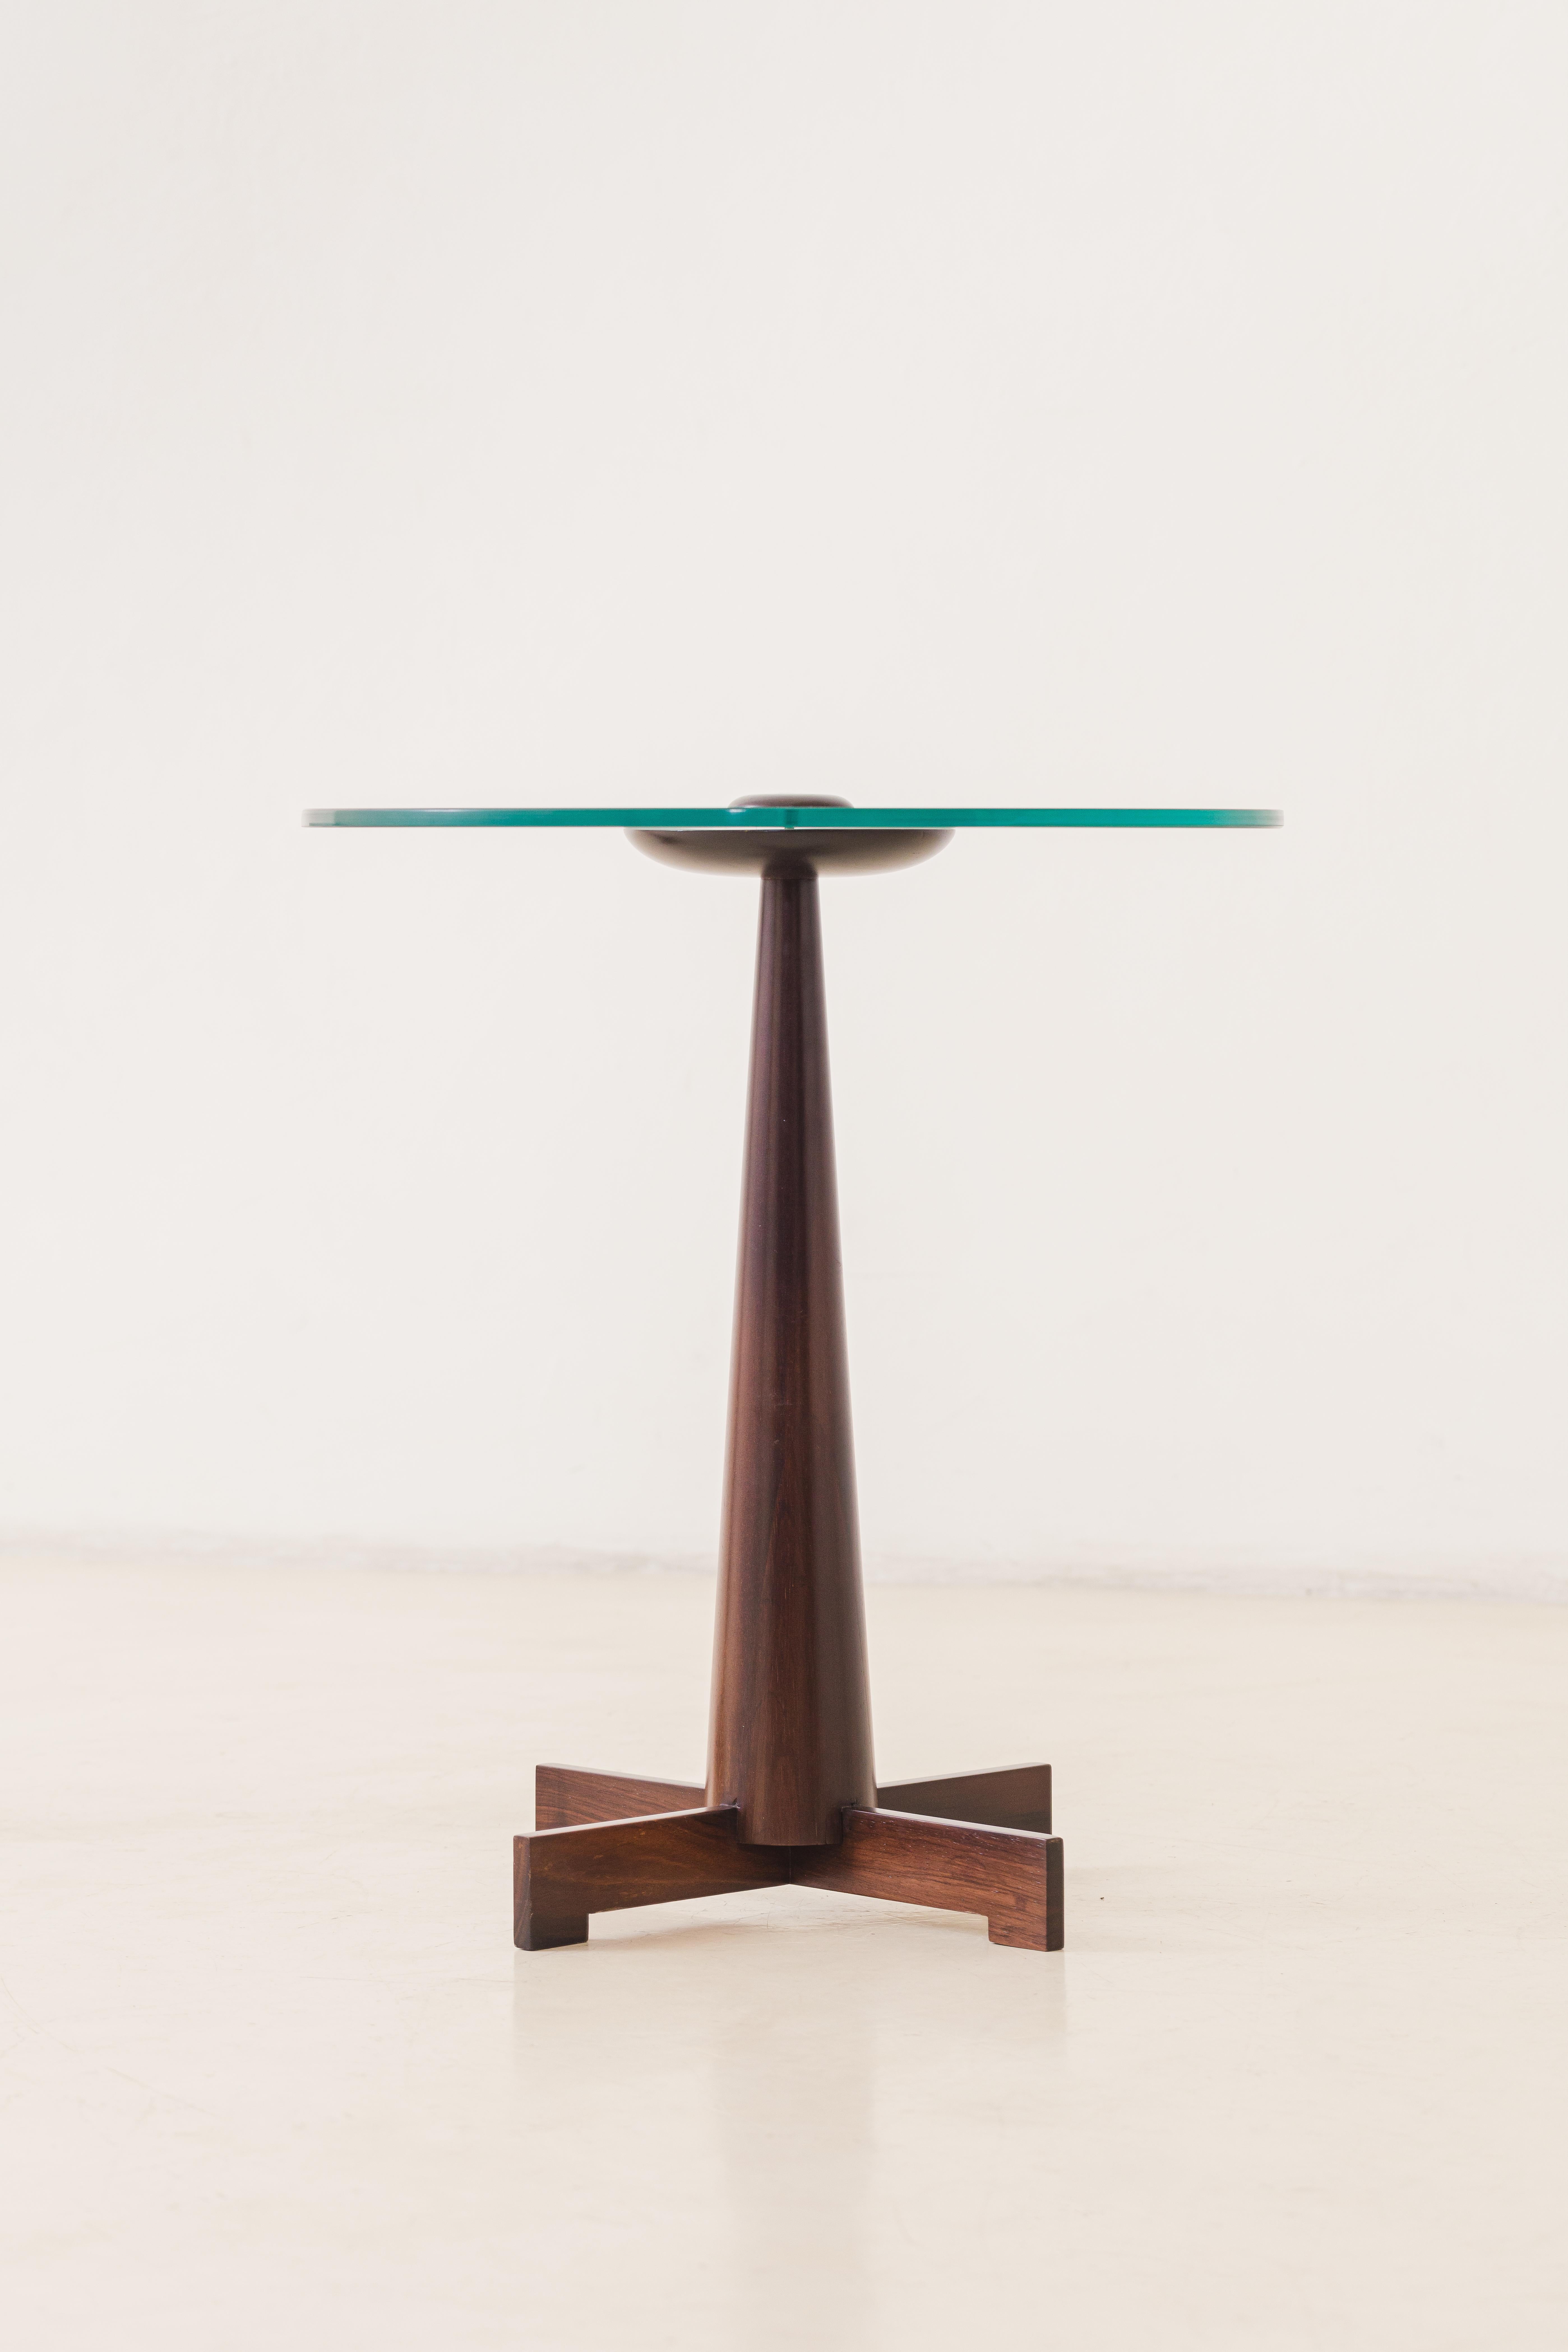 Brazilian Me 508 Side Tables by Jorge Zalszupin, Rosewood and Glass, Brazil, circa 1959 For Sale